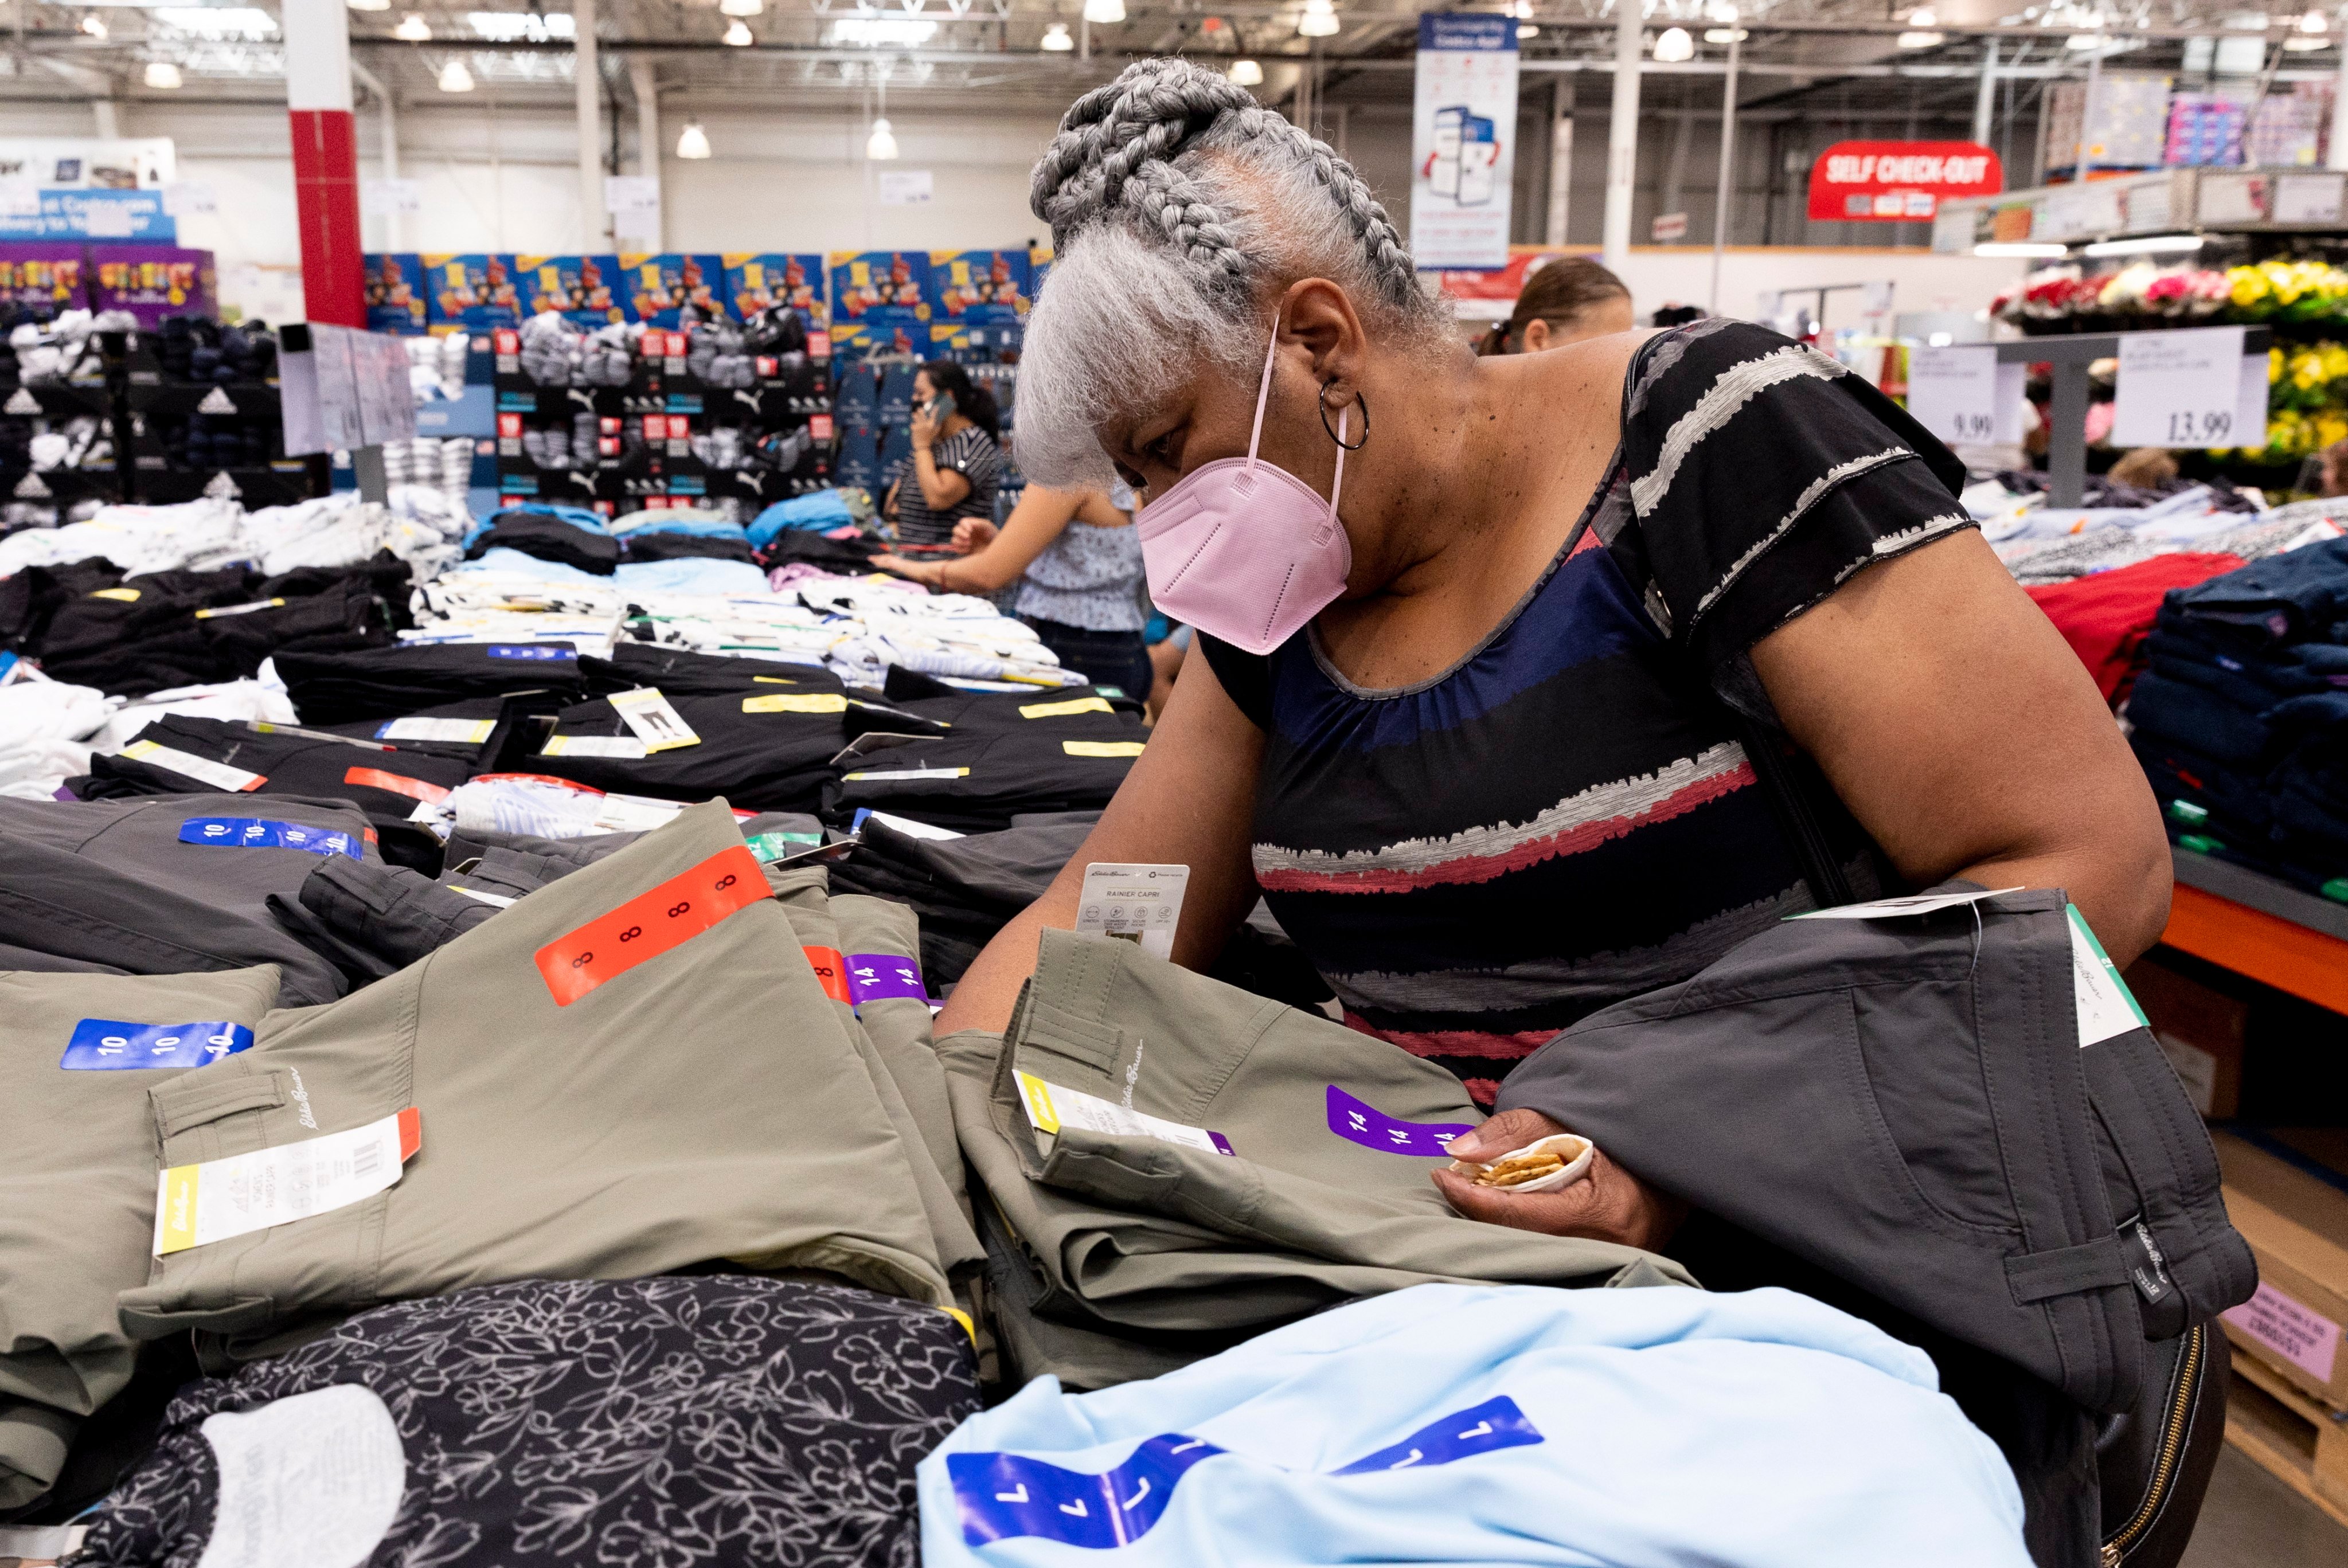 Customers look at clothing, some of which is produced in China, at a Costco store in Washington on July 6. Consumers are likely to shift spending back to services from goods and there are already signs of export growth decelerating in Asia. Photo: EPA-EFE